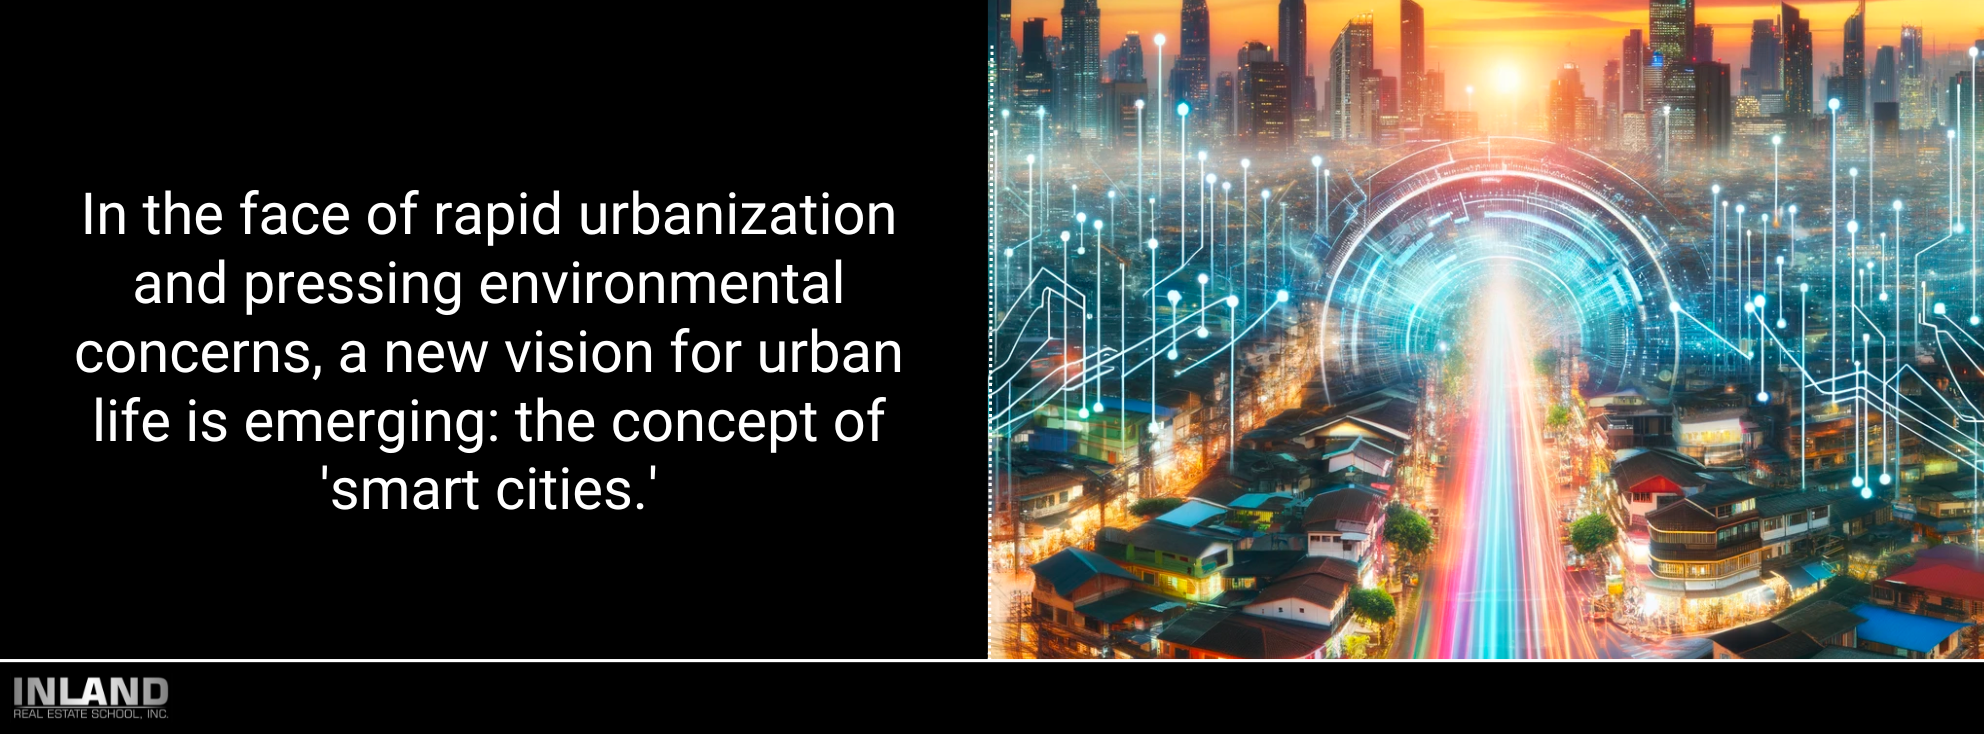 Busy urban landscape transitioning into a digital cityscape, illustrating the concept of smart cities.